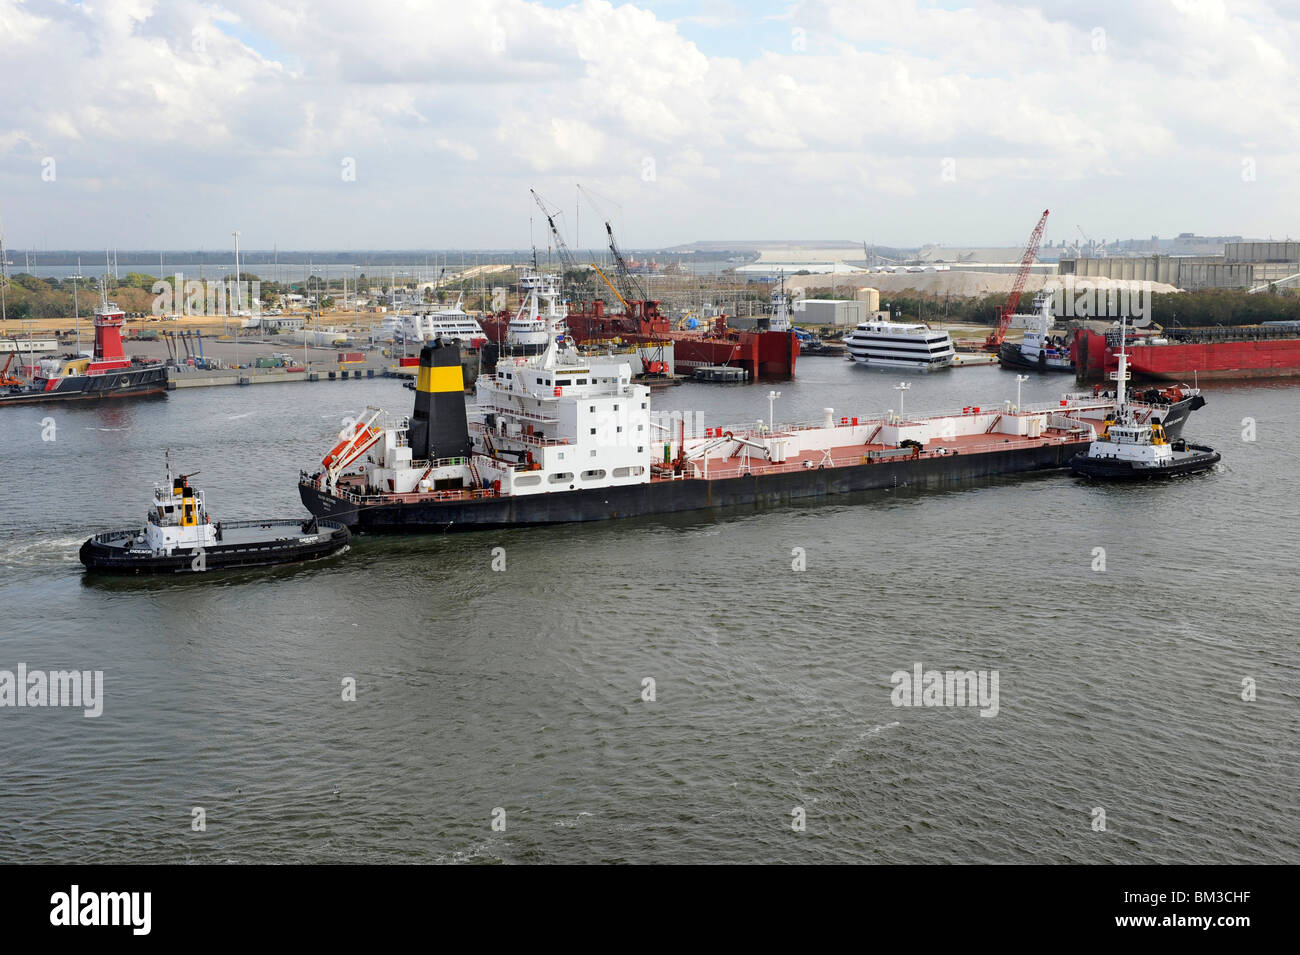 Tugboat moving barge in Tampa Bay Florida waterway harbor channel Stock Photo